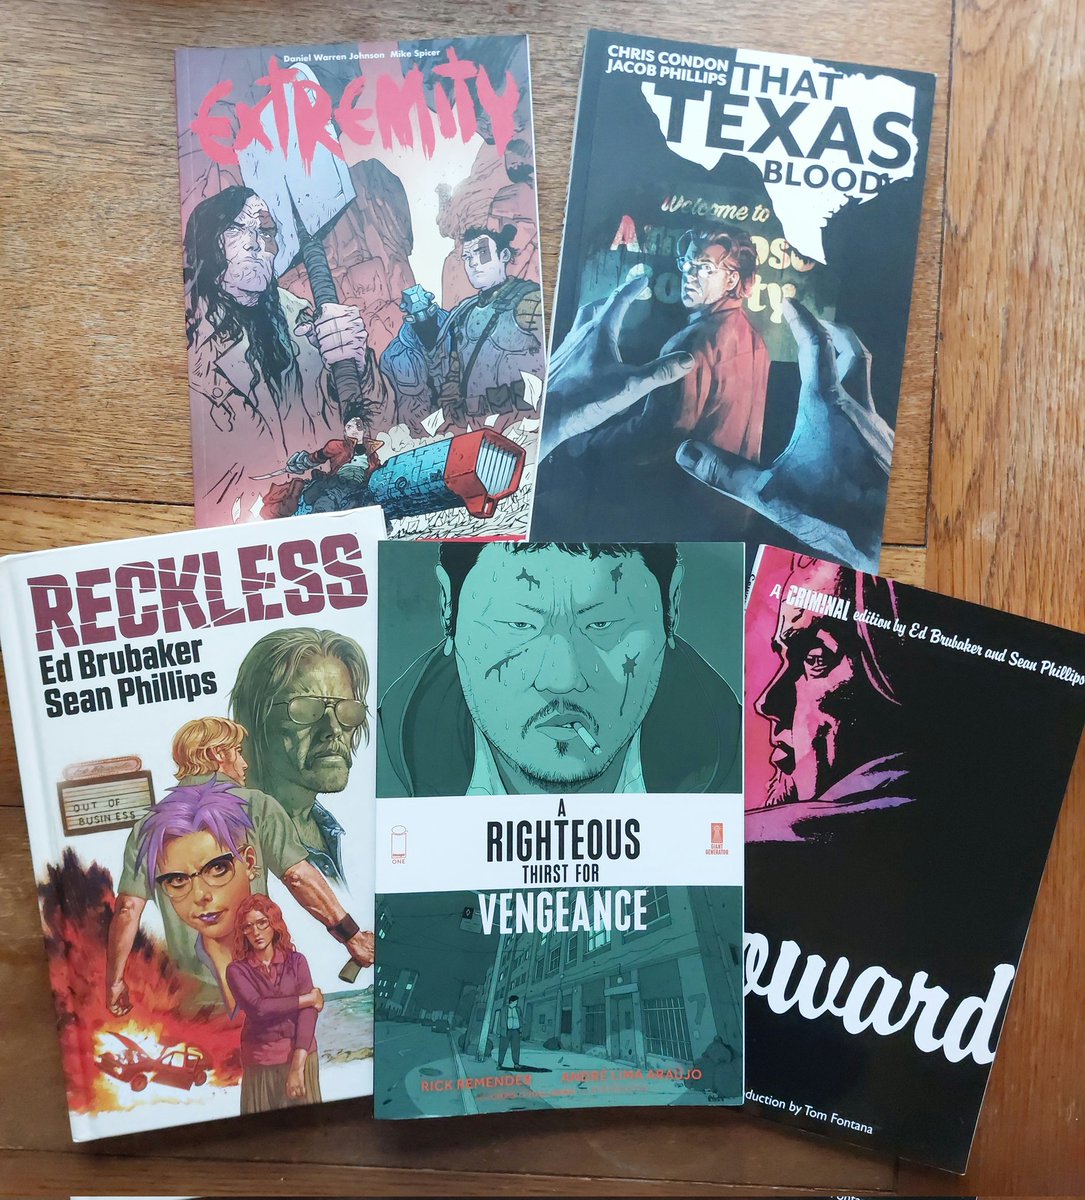 A friend has been out of comics for a while and asked for some recent recommendations. Here are my picks. I definitely wanted to get some @danielwarrenart and Brubaker/@seanpphillips in there, as well as That Texas Blood and Righteous Thirst For Vengeance. Any other suggestions?